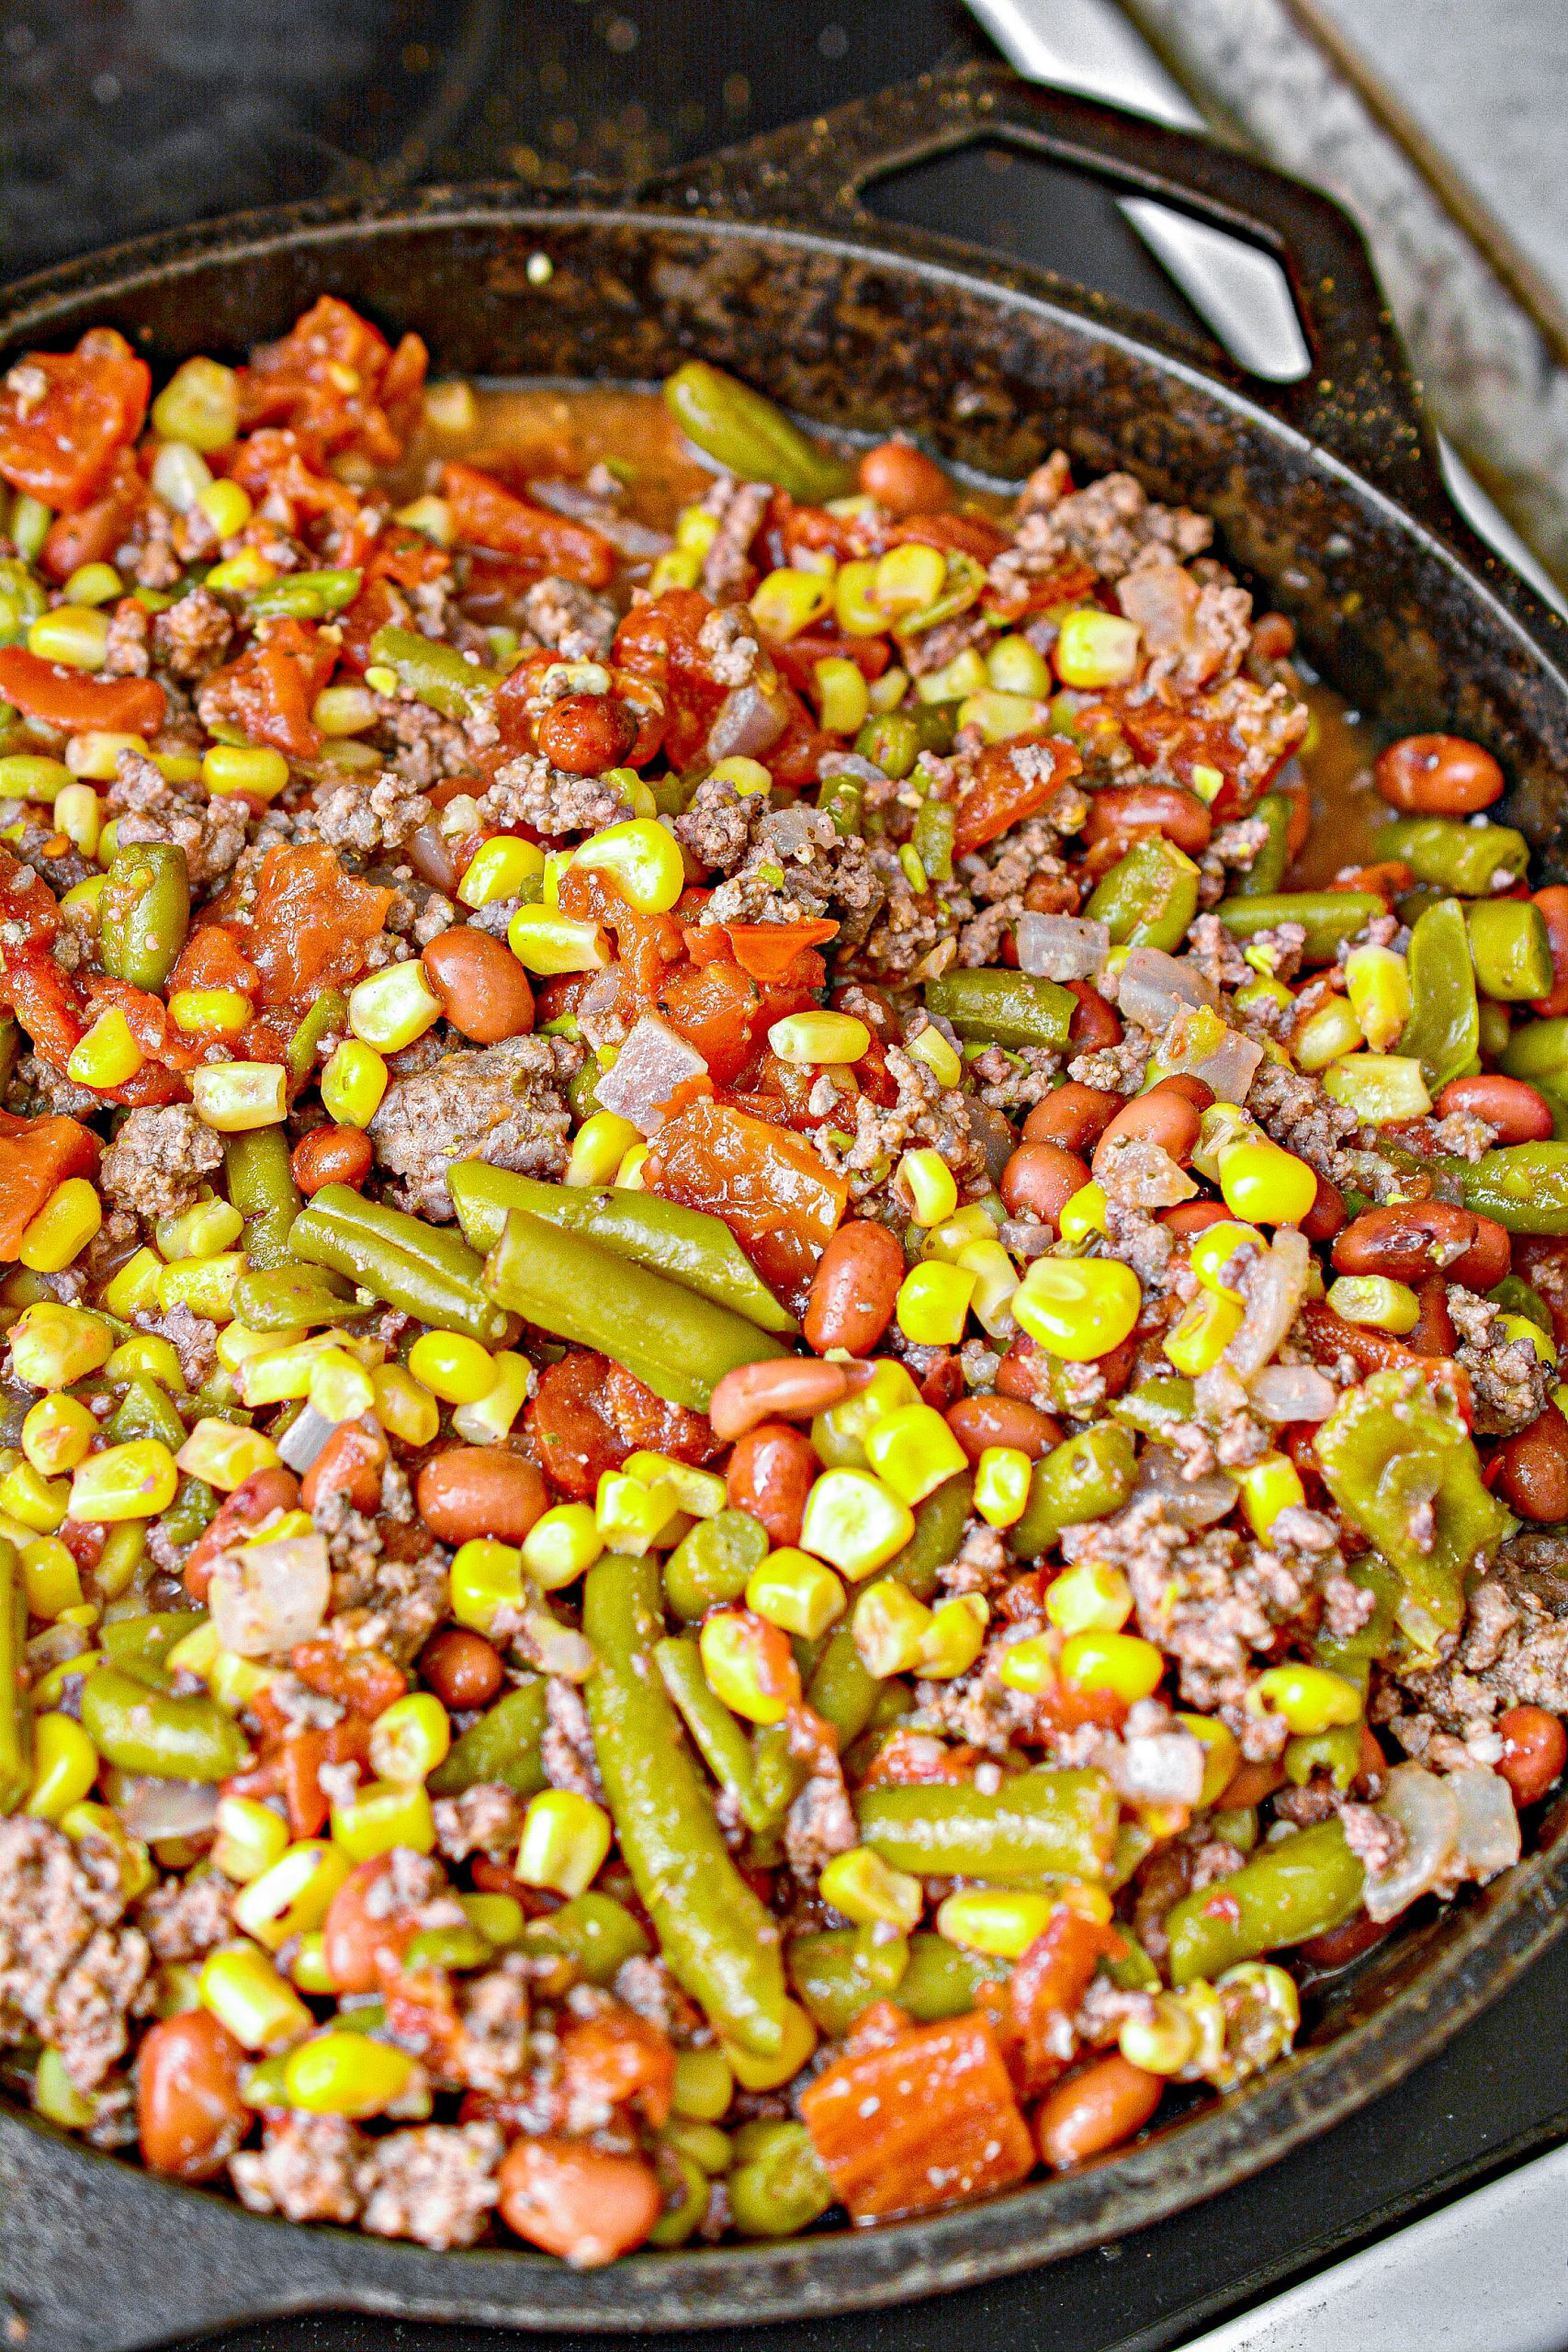 Pour the corn, green beans, red beans, stewed tomatoes, and diced tomatoes into the pot or skillet, and stir to combine completely.